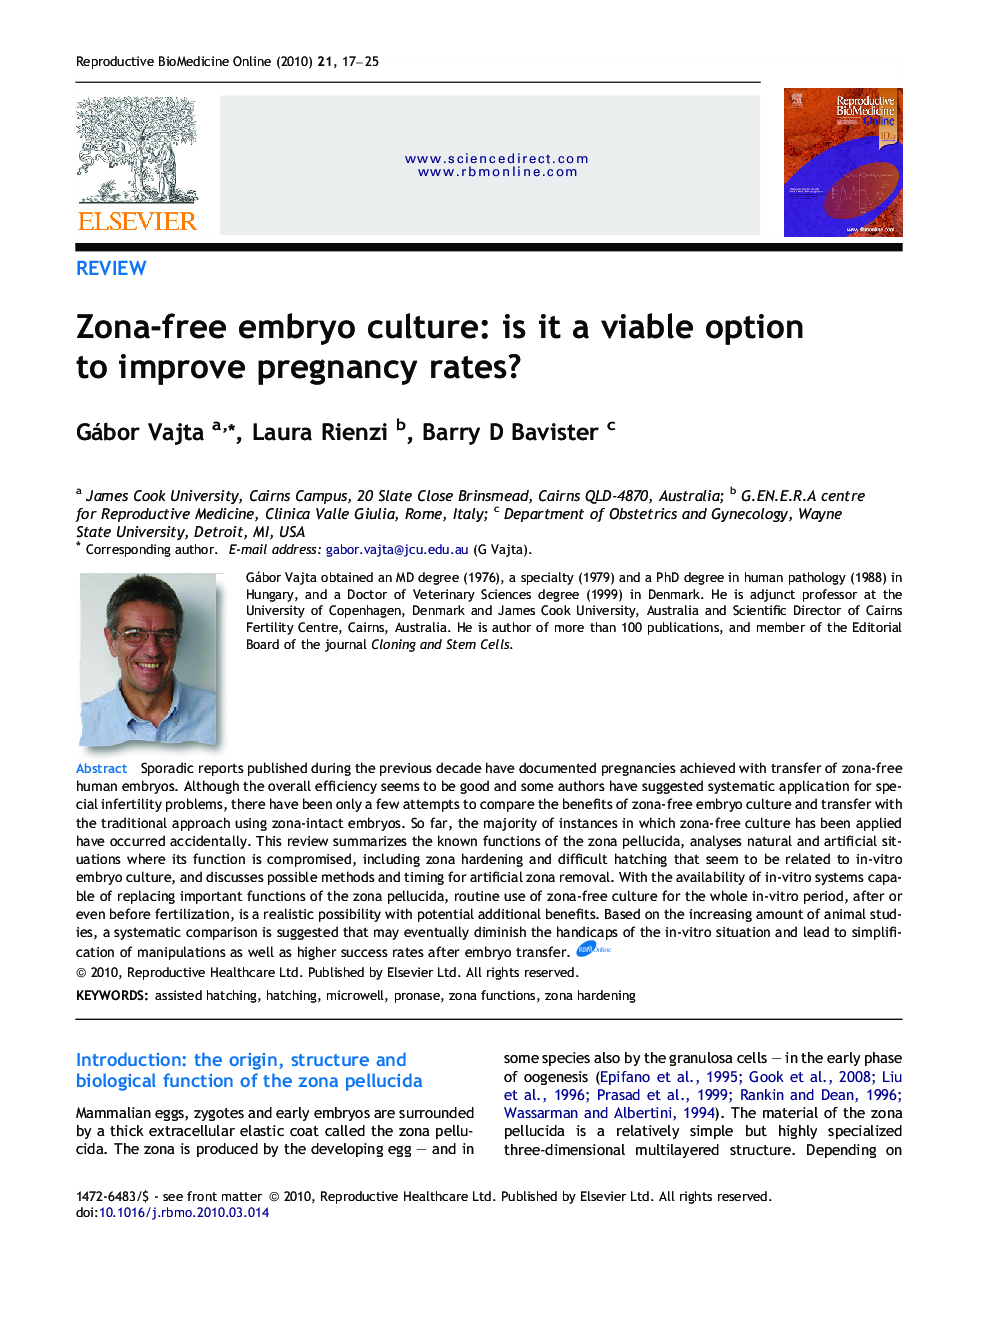 Zona-free embryo culture: is it a viable option to improve pregnancy rates? 